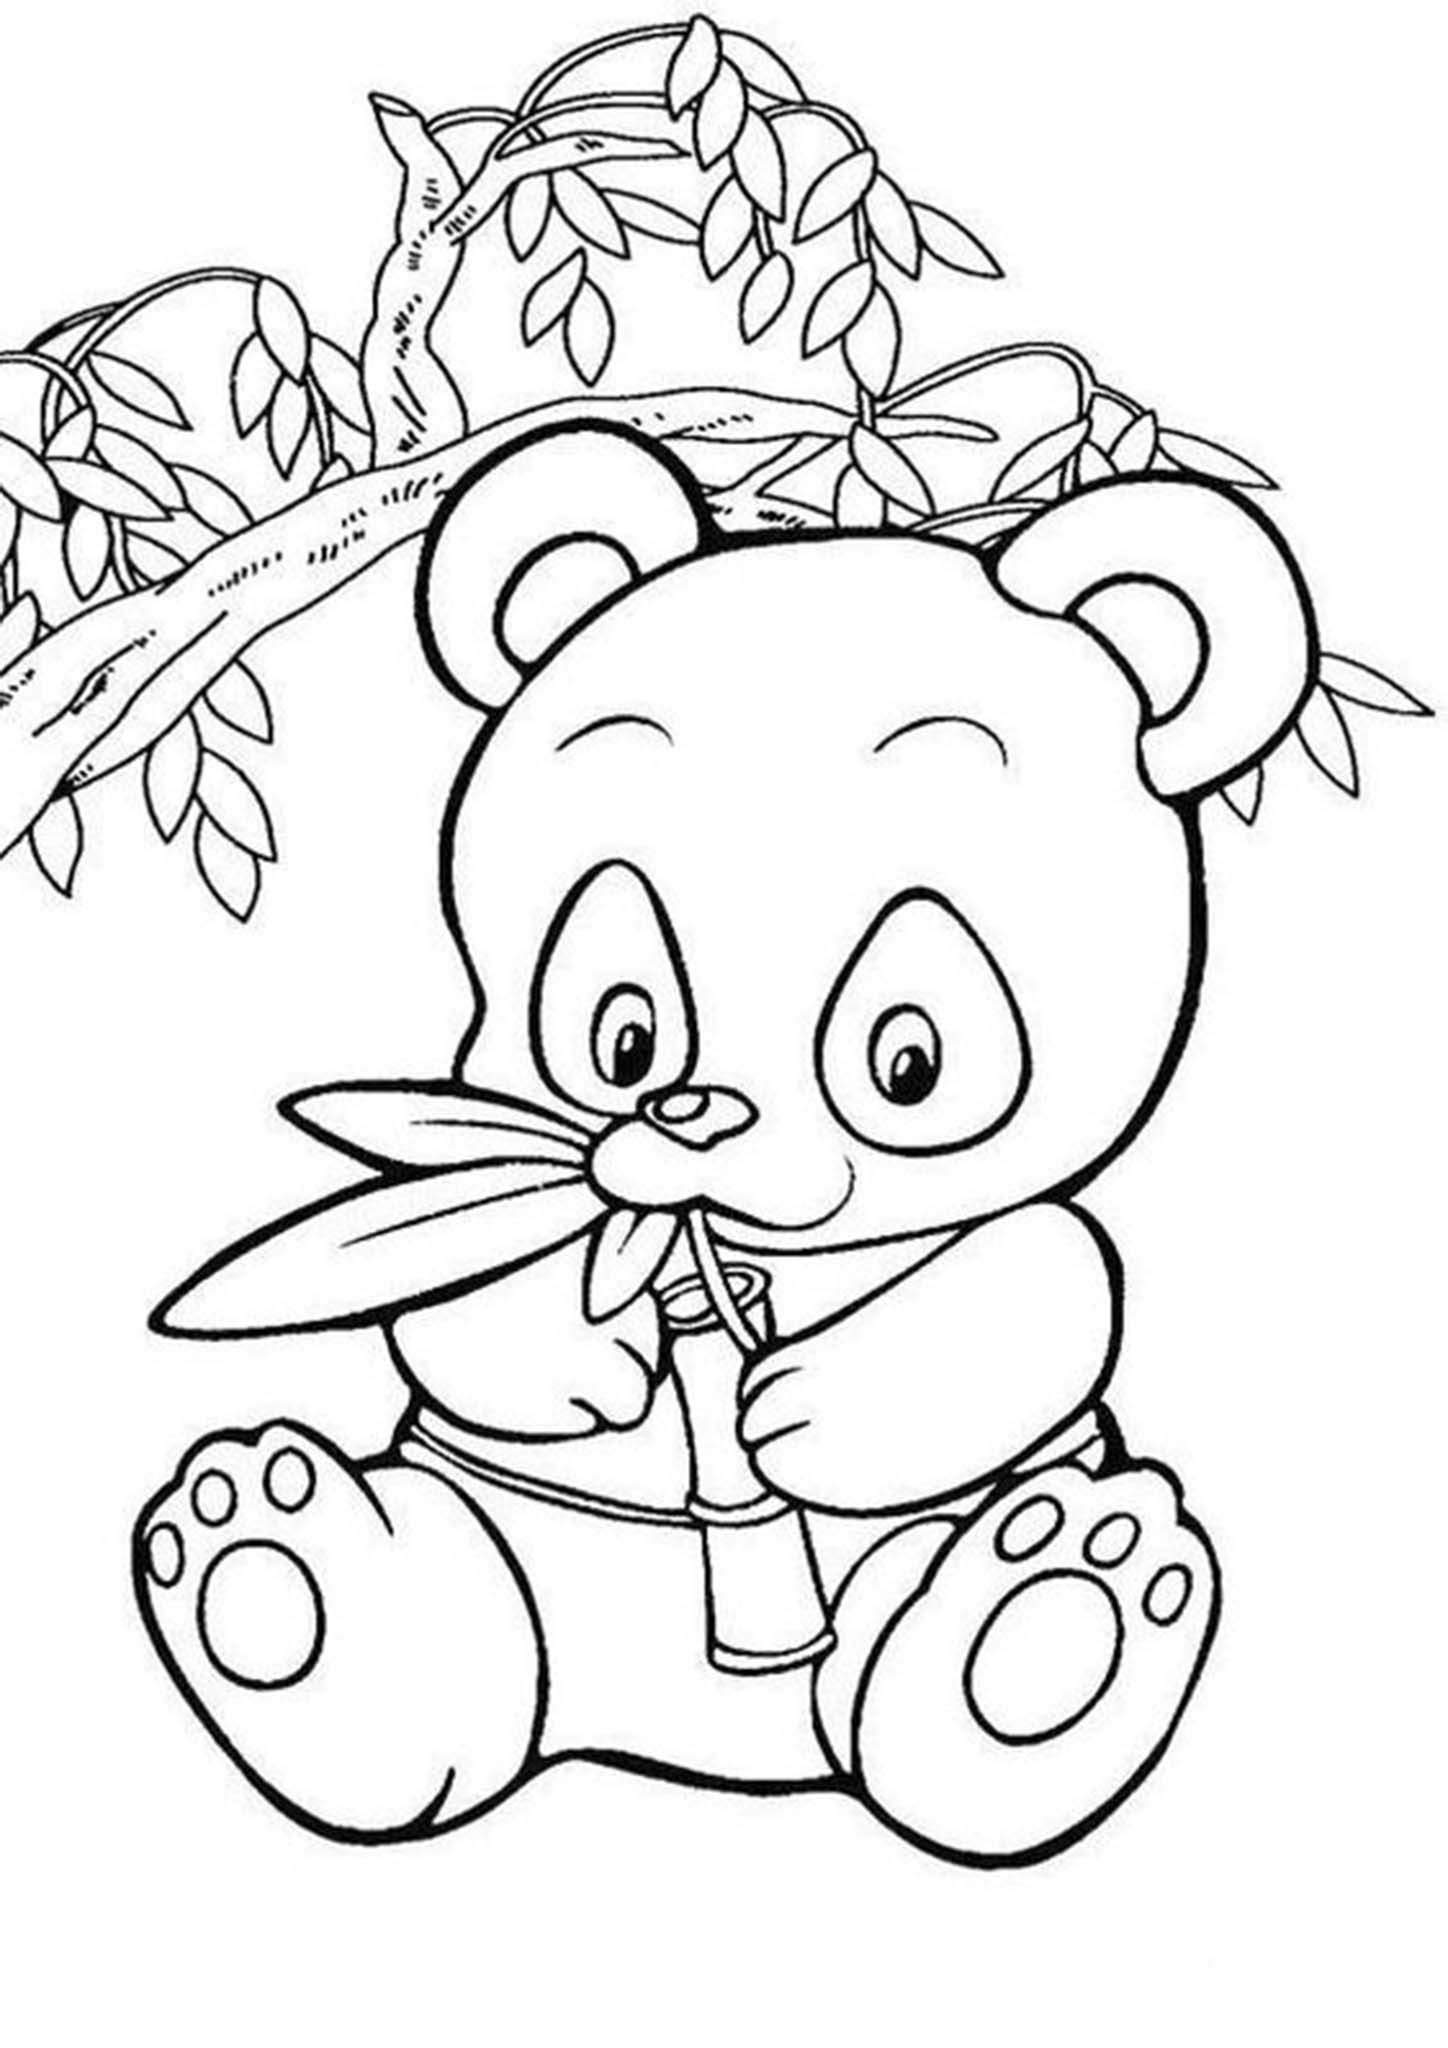 Panda Coloring Pages Printable Customize And Print